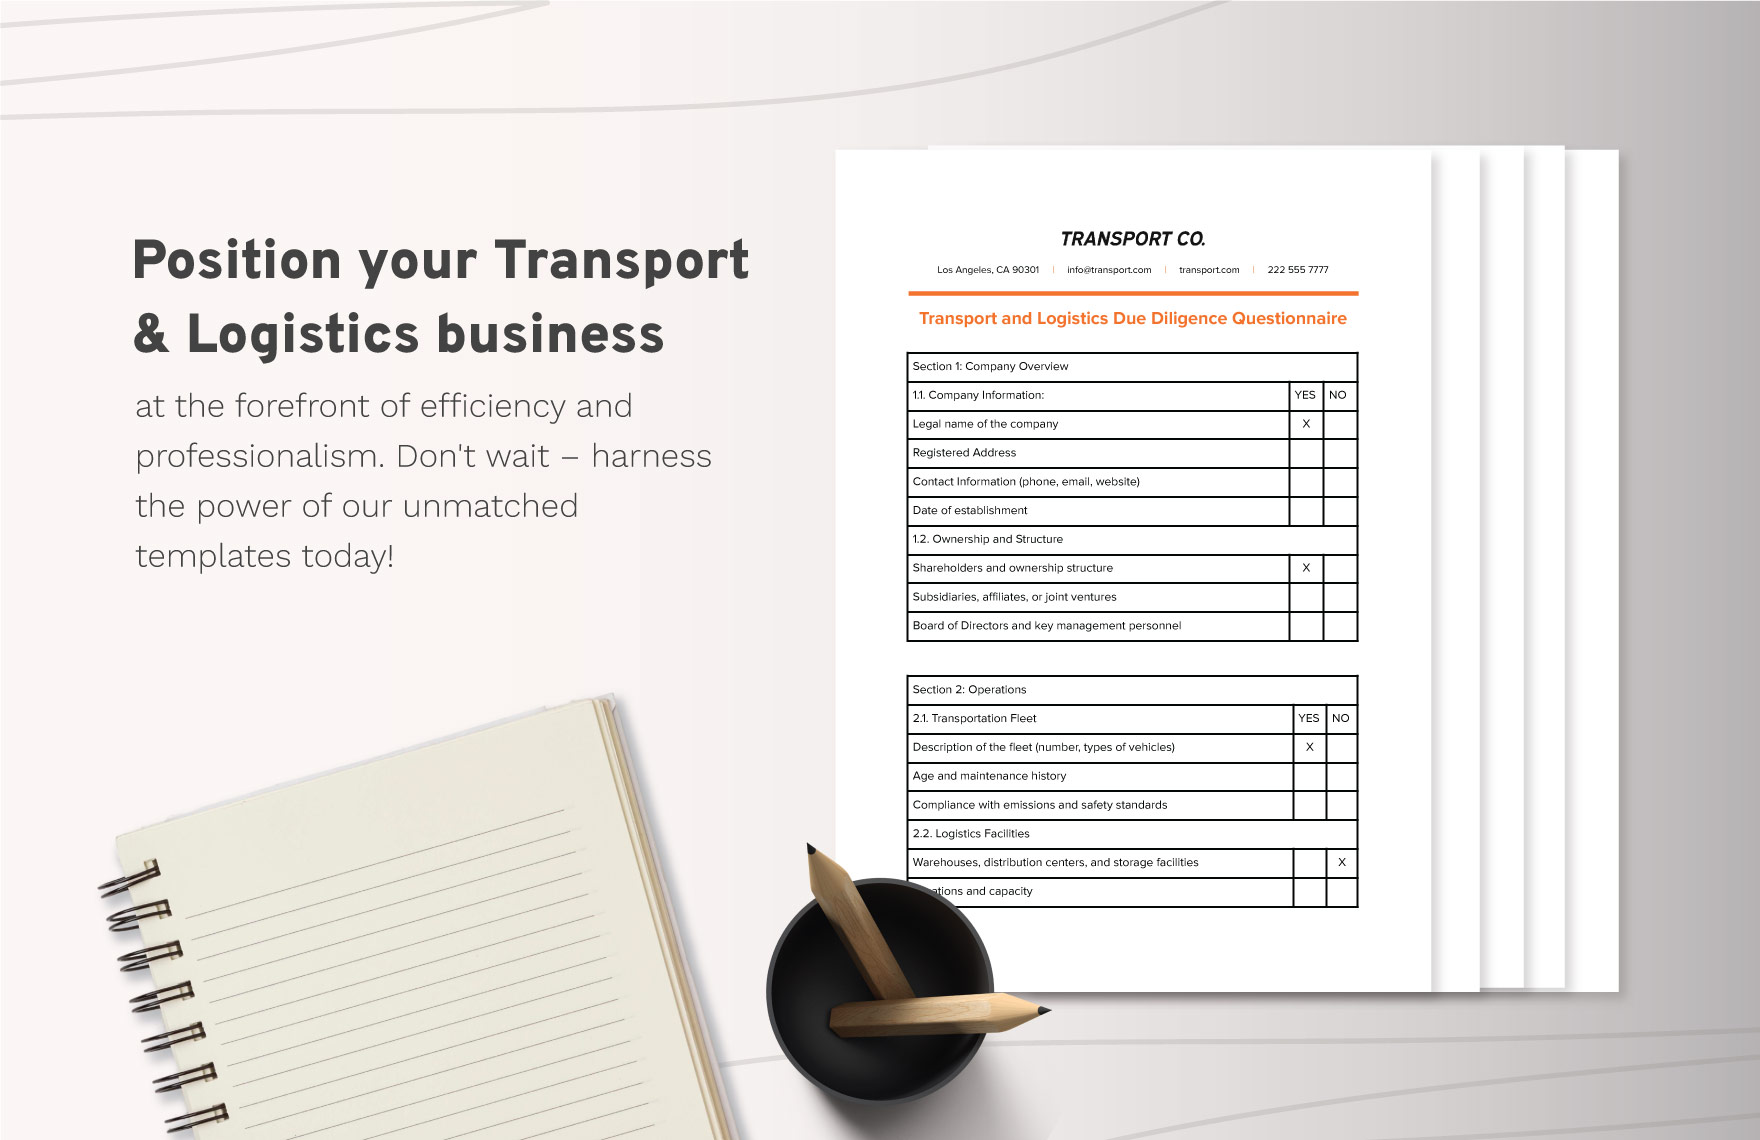 Transport and Logistics Due Diligence Questionnaire Template